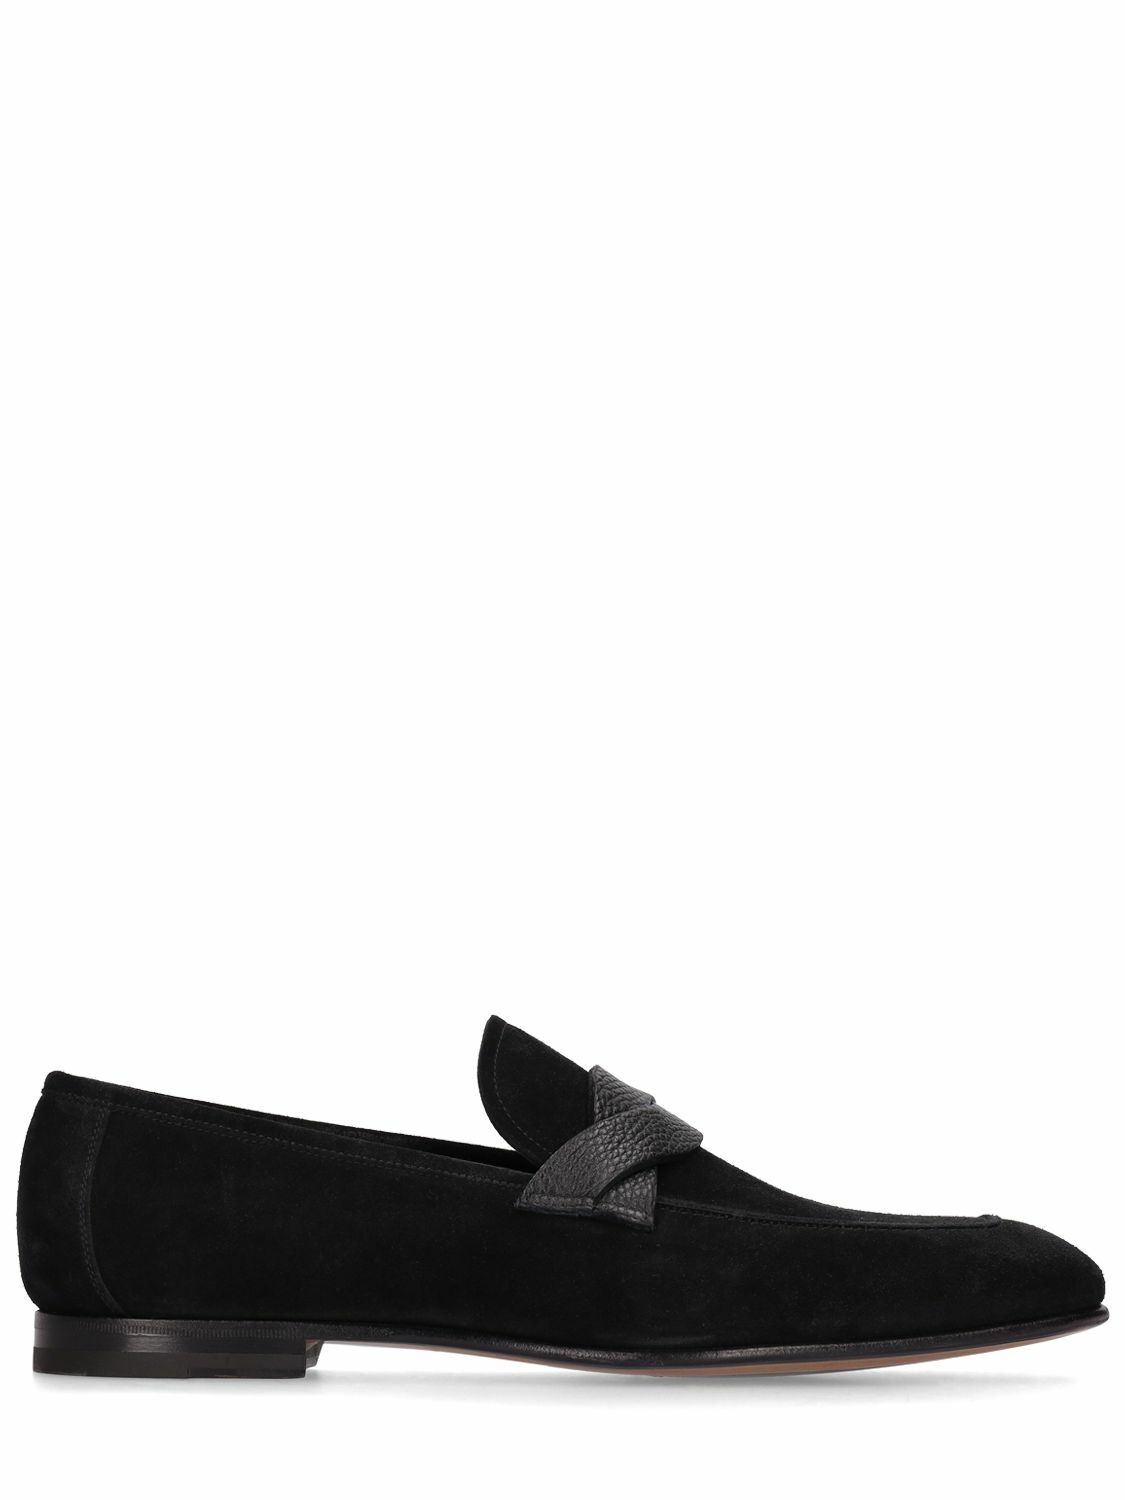 Photo: TOM FORD - Suede Loafers